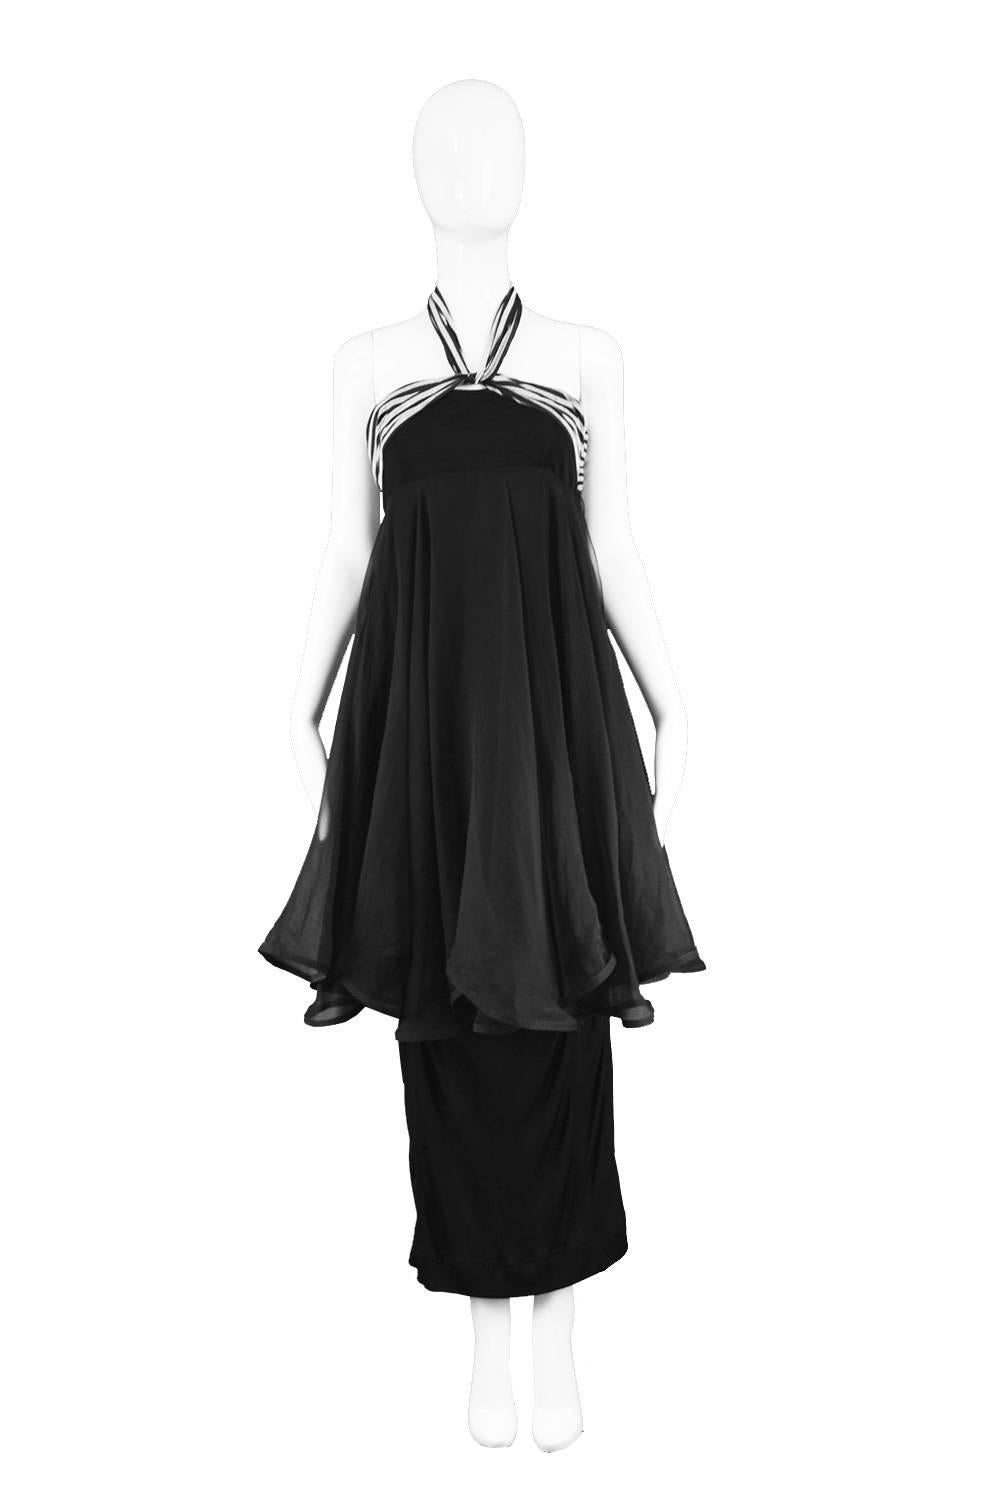 Angelo Tarlazzi Tiered Silk Chiffon & Black Jersey Halter Evening Dress, 1980s

Estimated Size: UK 10/ US 6/ EU 38. Please check measurements. 
Bust - 34” / 86cm
Waist - 28” / 71cm 
Hips - Stretches up to 42” / 106cm
Length (Bust to Hem) - 47” /